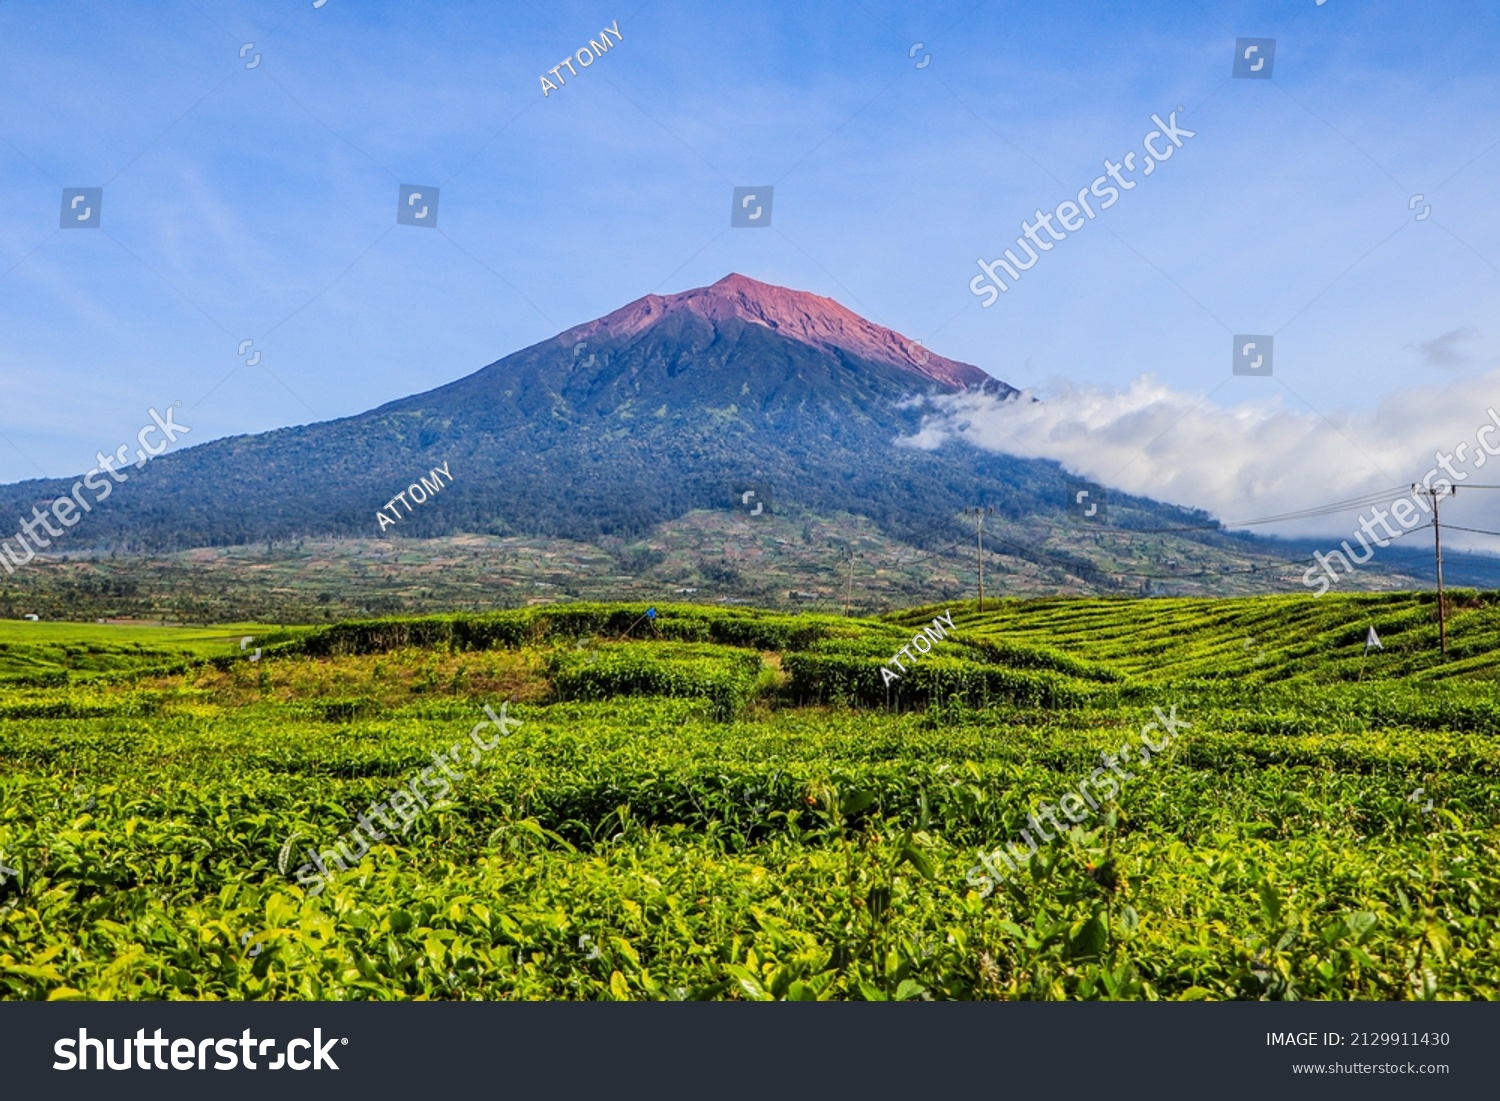 Mount Kerinci is the highest mountain in Sumatra and the highest volcano in Indonesia with an altitude of 3805 masl in the Kerinci Seblat National Park area. Kayu Aro, Kerinci, Jambi, Indonesia, Asia. #2129911430